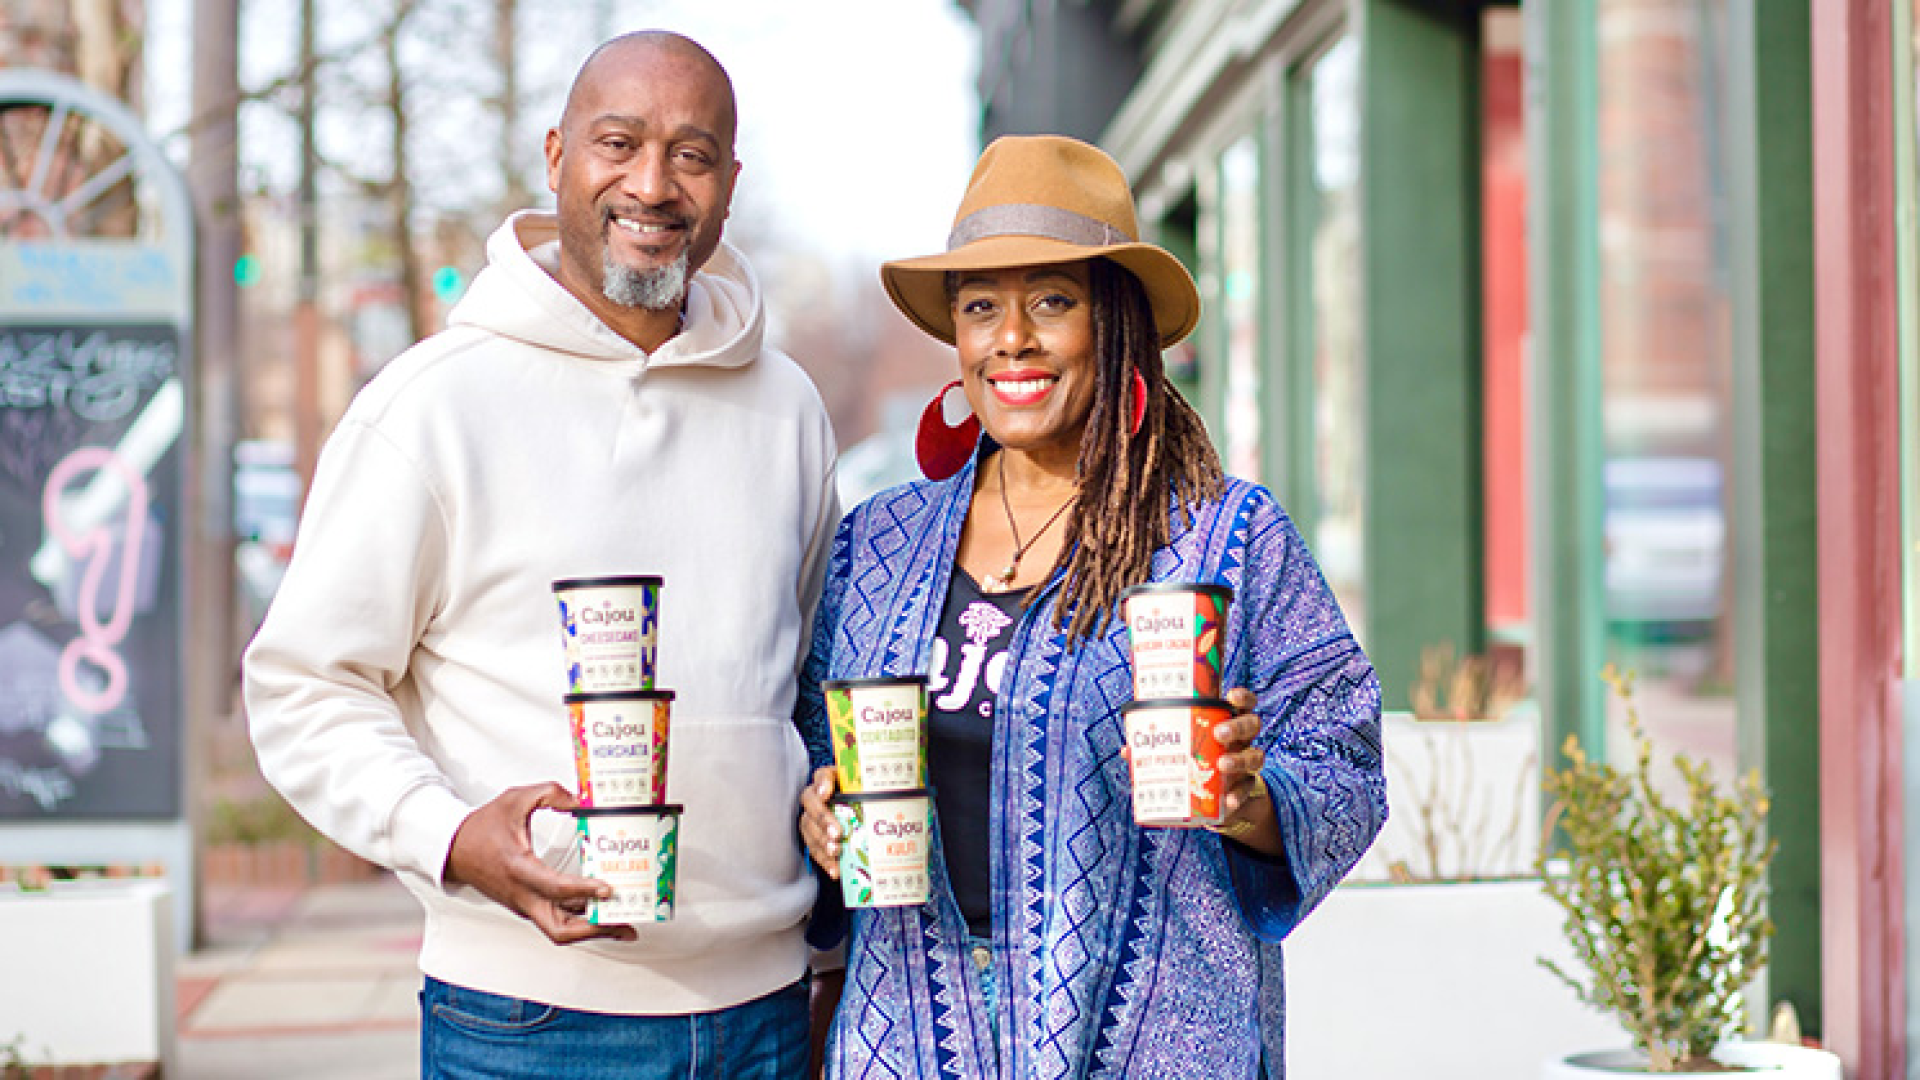 This Couple Launched A Global Inspired Plant-Based Ice Cream Brand Born From Their Love Of Travel